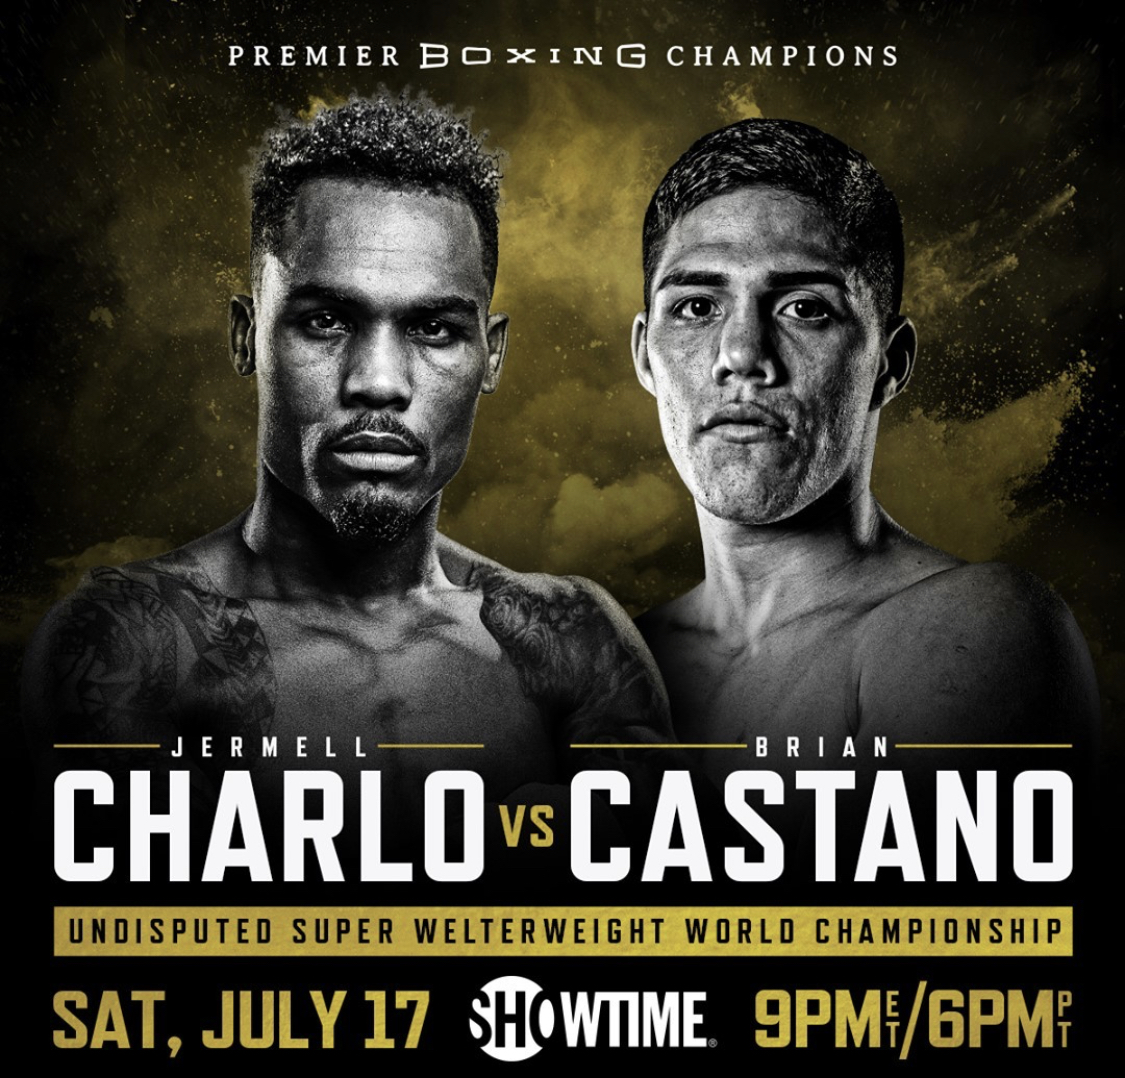 JERMELL CHARLO VS. BRIAN CASTANO JULY 17TH ON SHOWTIME